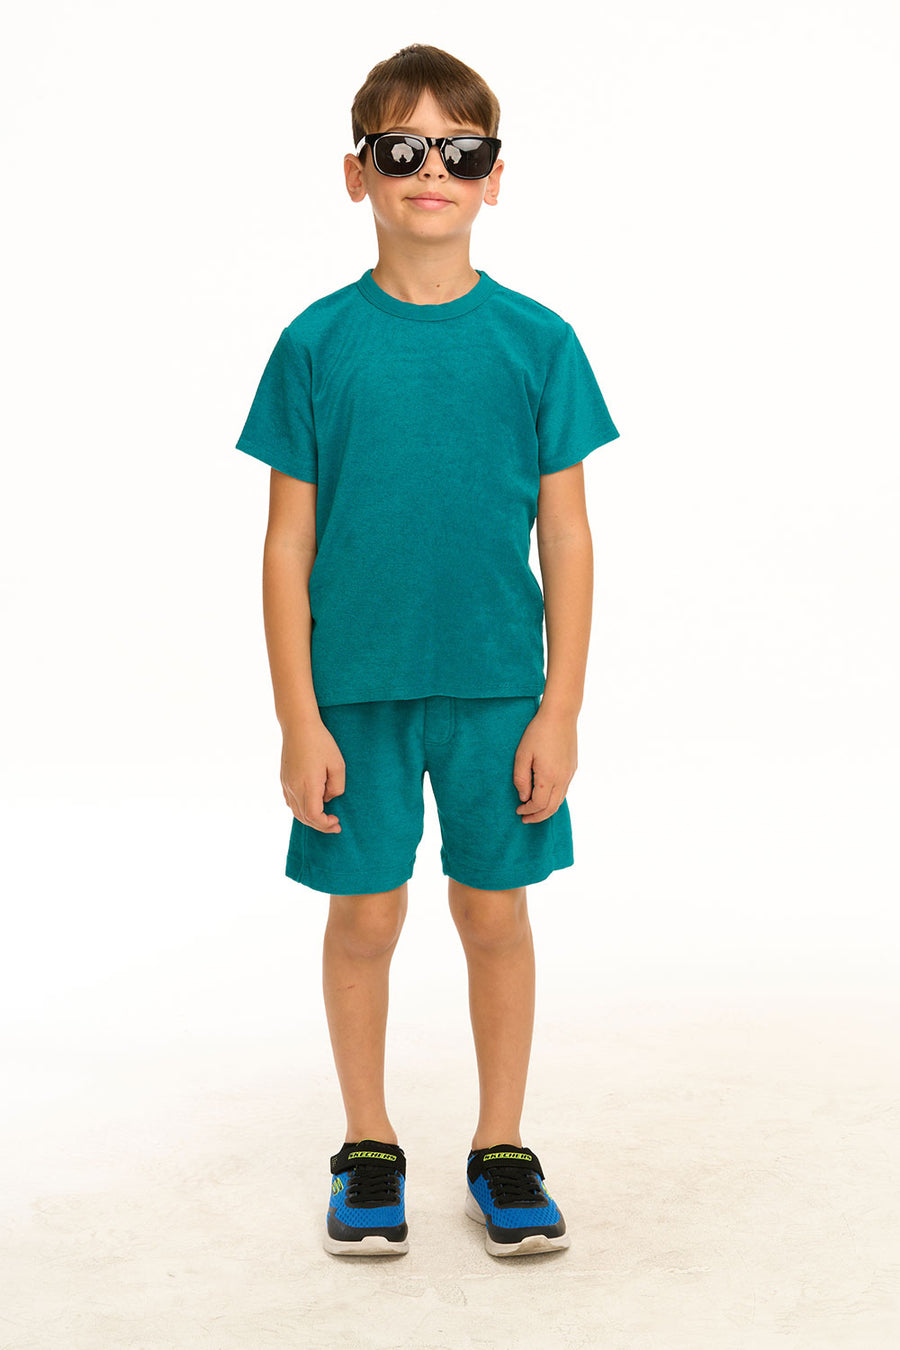 Boy's Lake Green Terry Cloth Tee BOYS chaserbrand